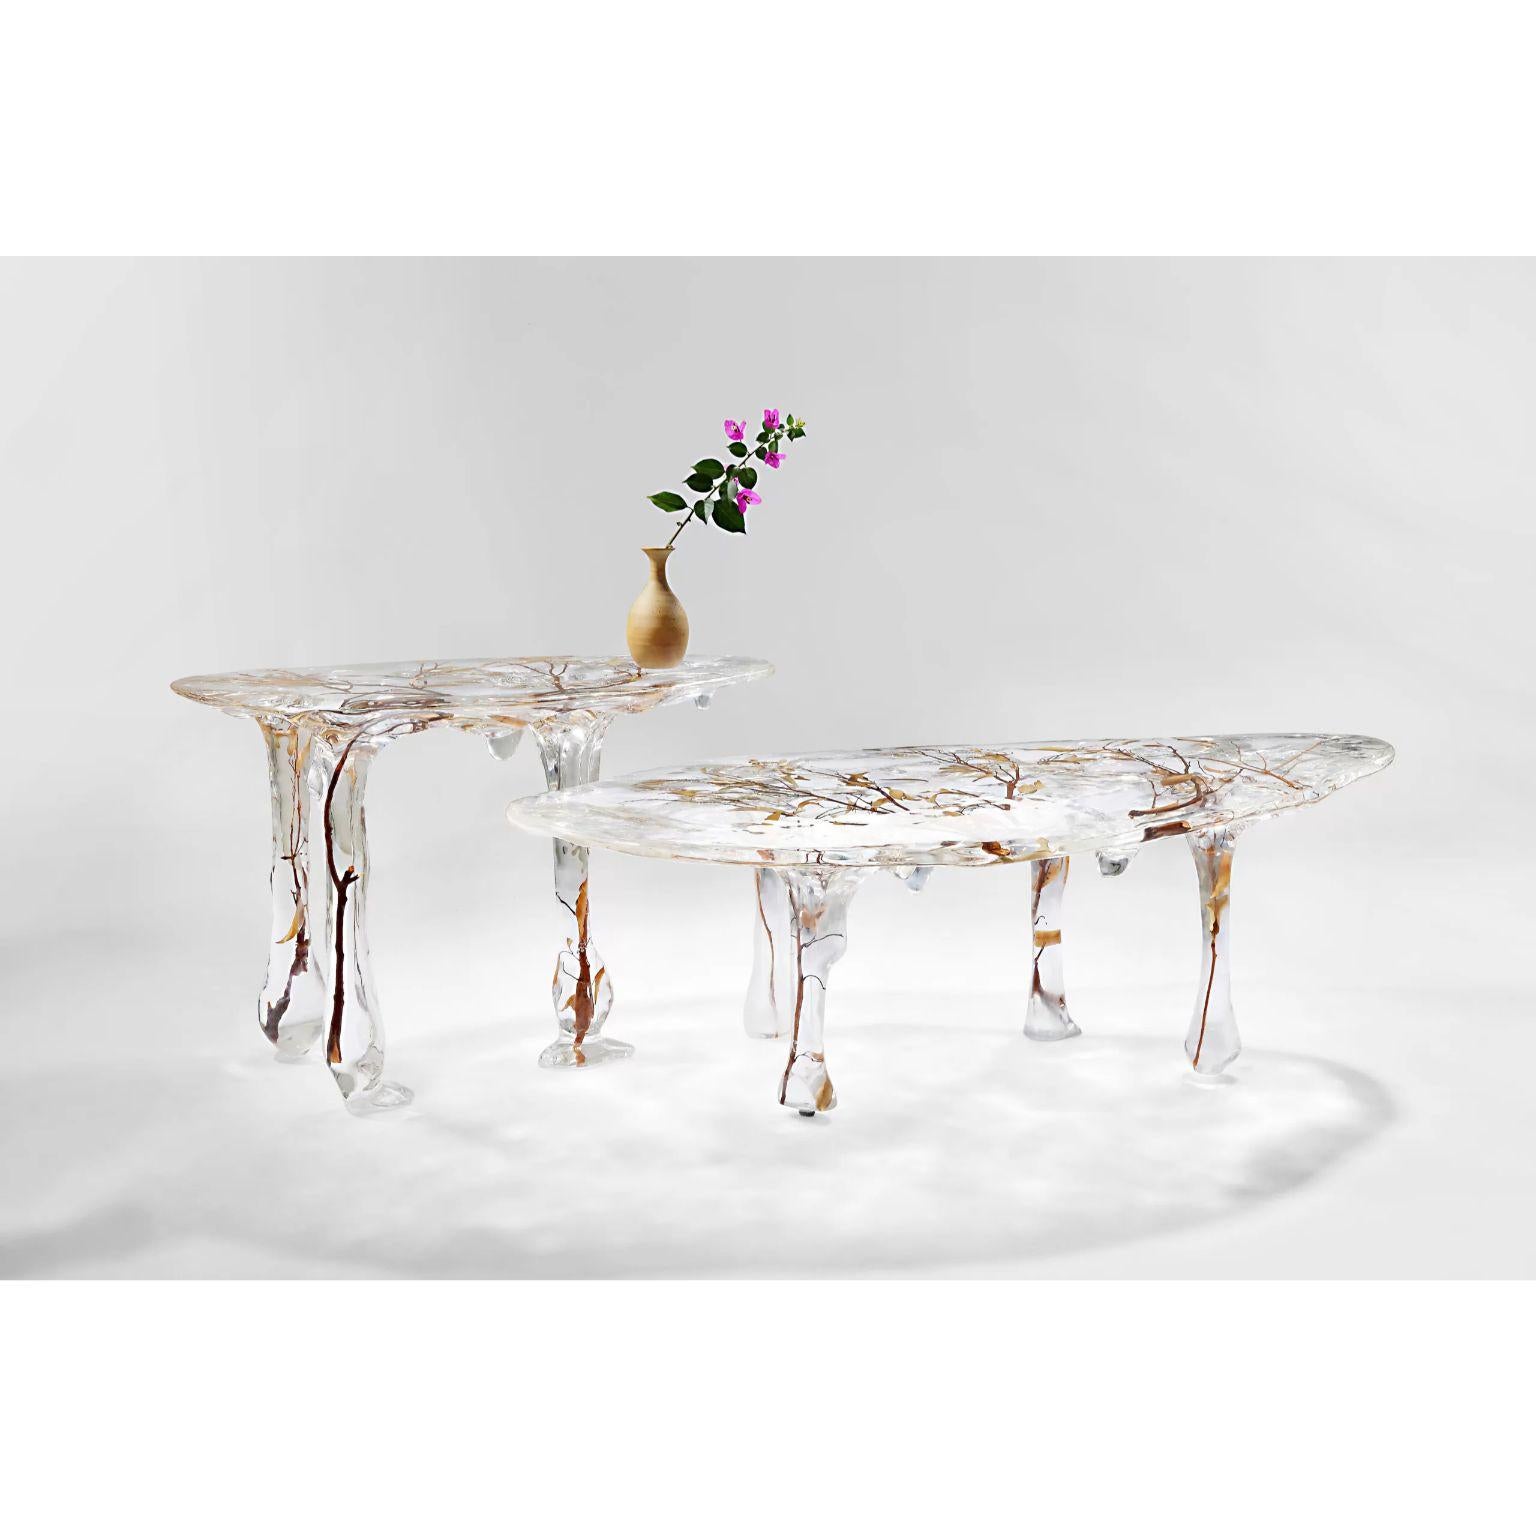 Crystal Icicle Table by Dainte
Dimensions: D 63.5 x W 114.5 x H 40 cm.
Materials: Crystal.

Available in a circular and elongated oval design. Please contact us. 

This finely crafted table is a sophisticated piece of decor that will significantly